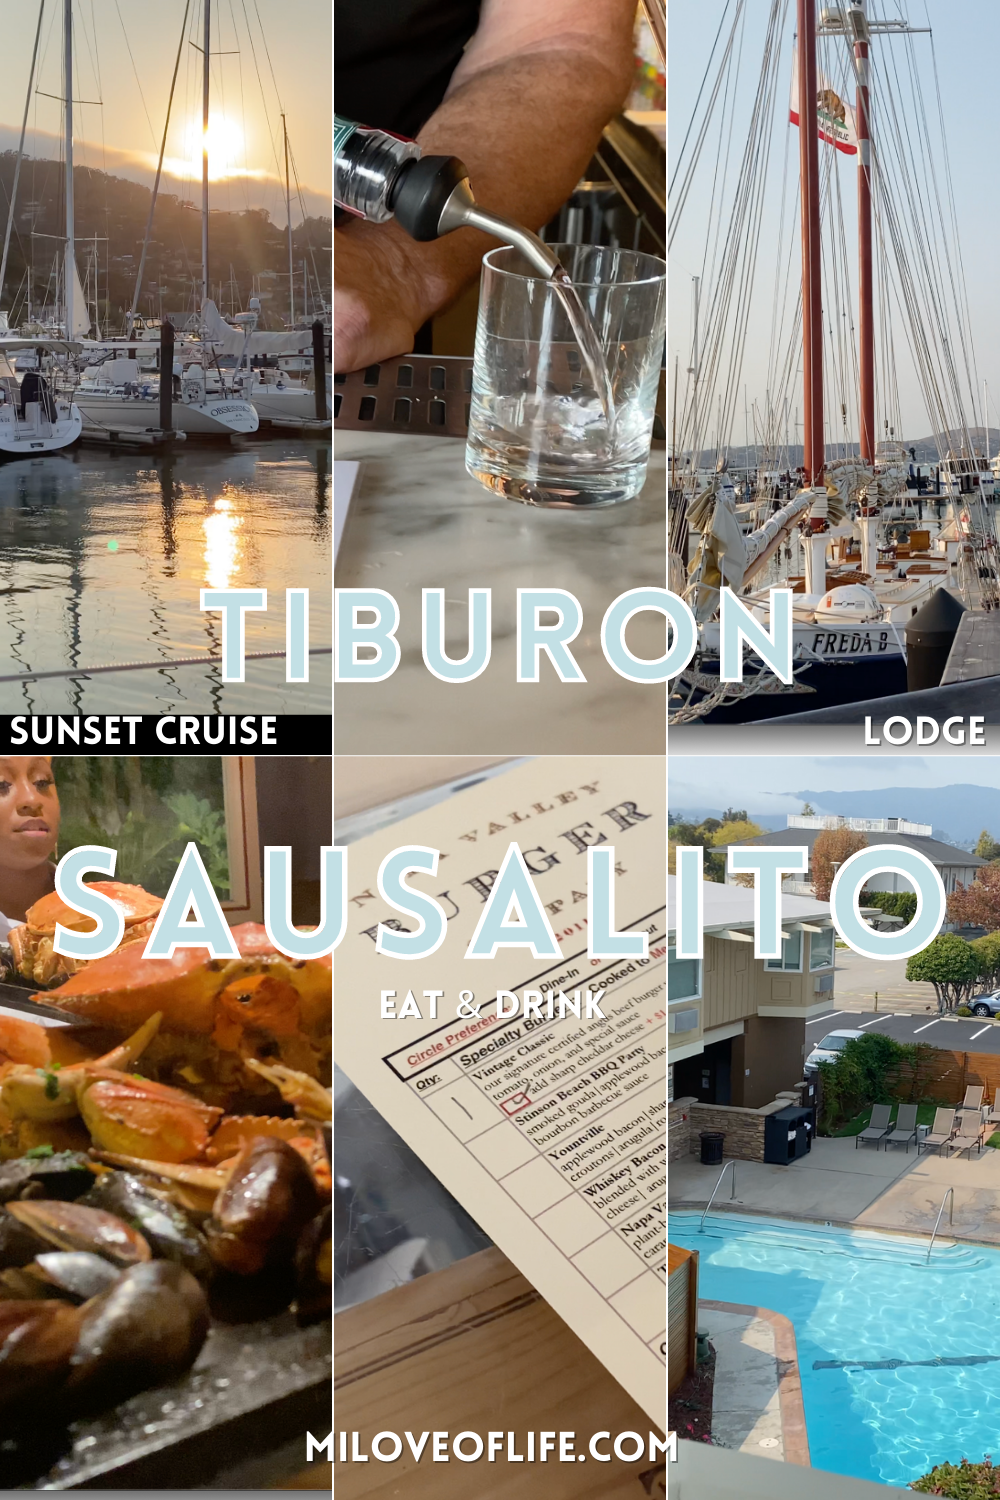 CALIFORNIA’S HIDDEN GEM EXPLORE SAUSALITO & TIBURON| Things to do, where to stay & what to eat!